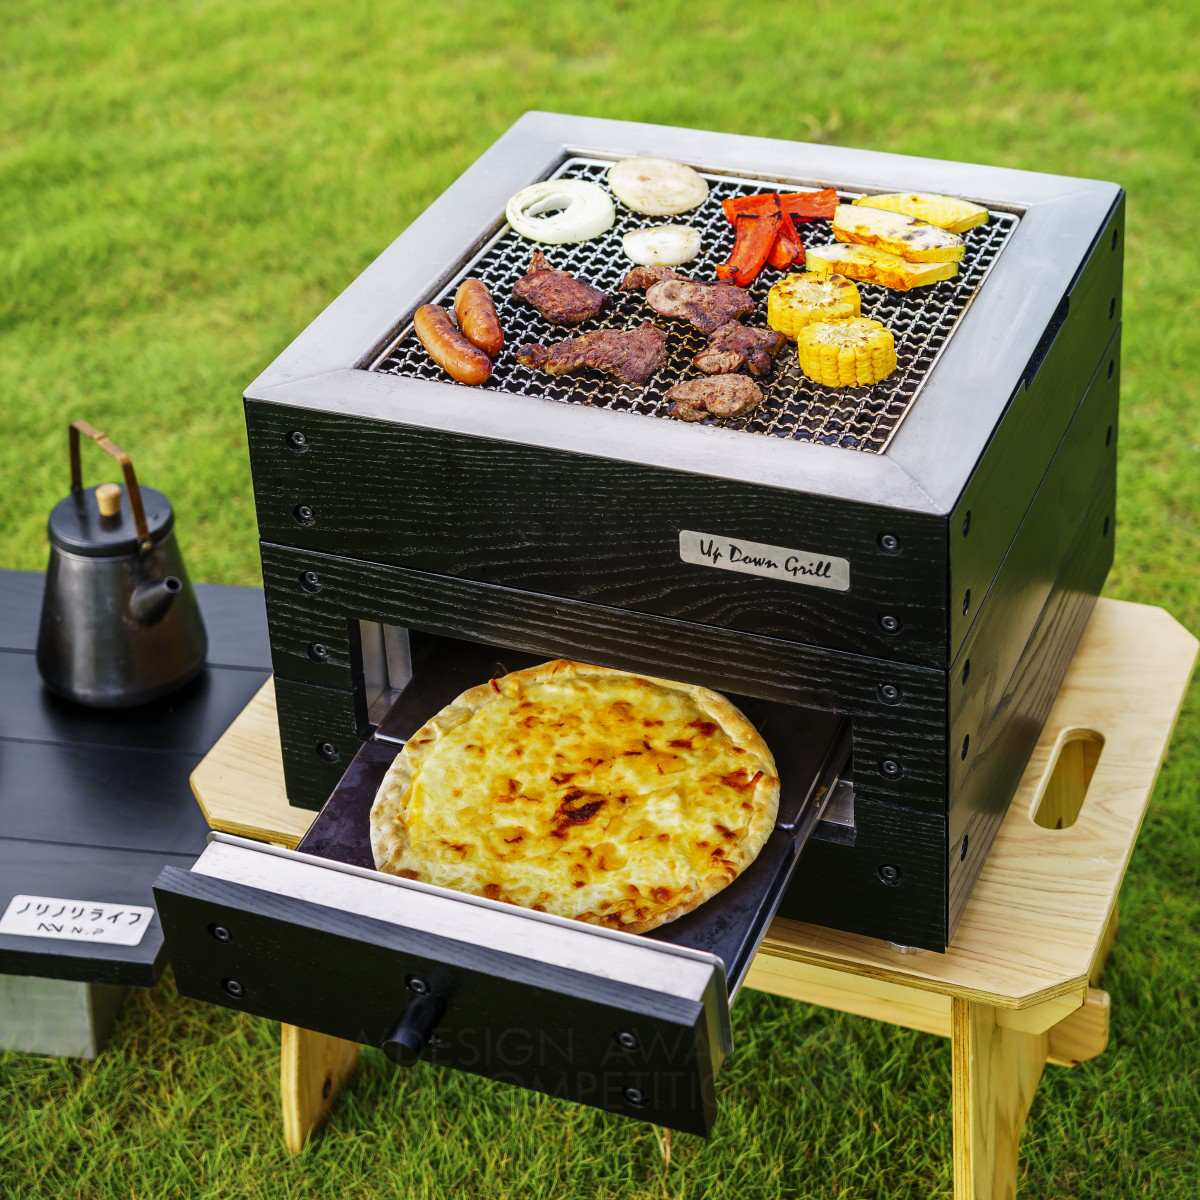 Up Down Grill Portable Oven by Kenzo Noridomi